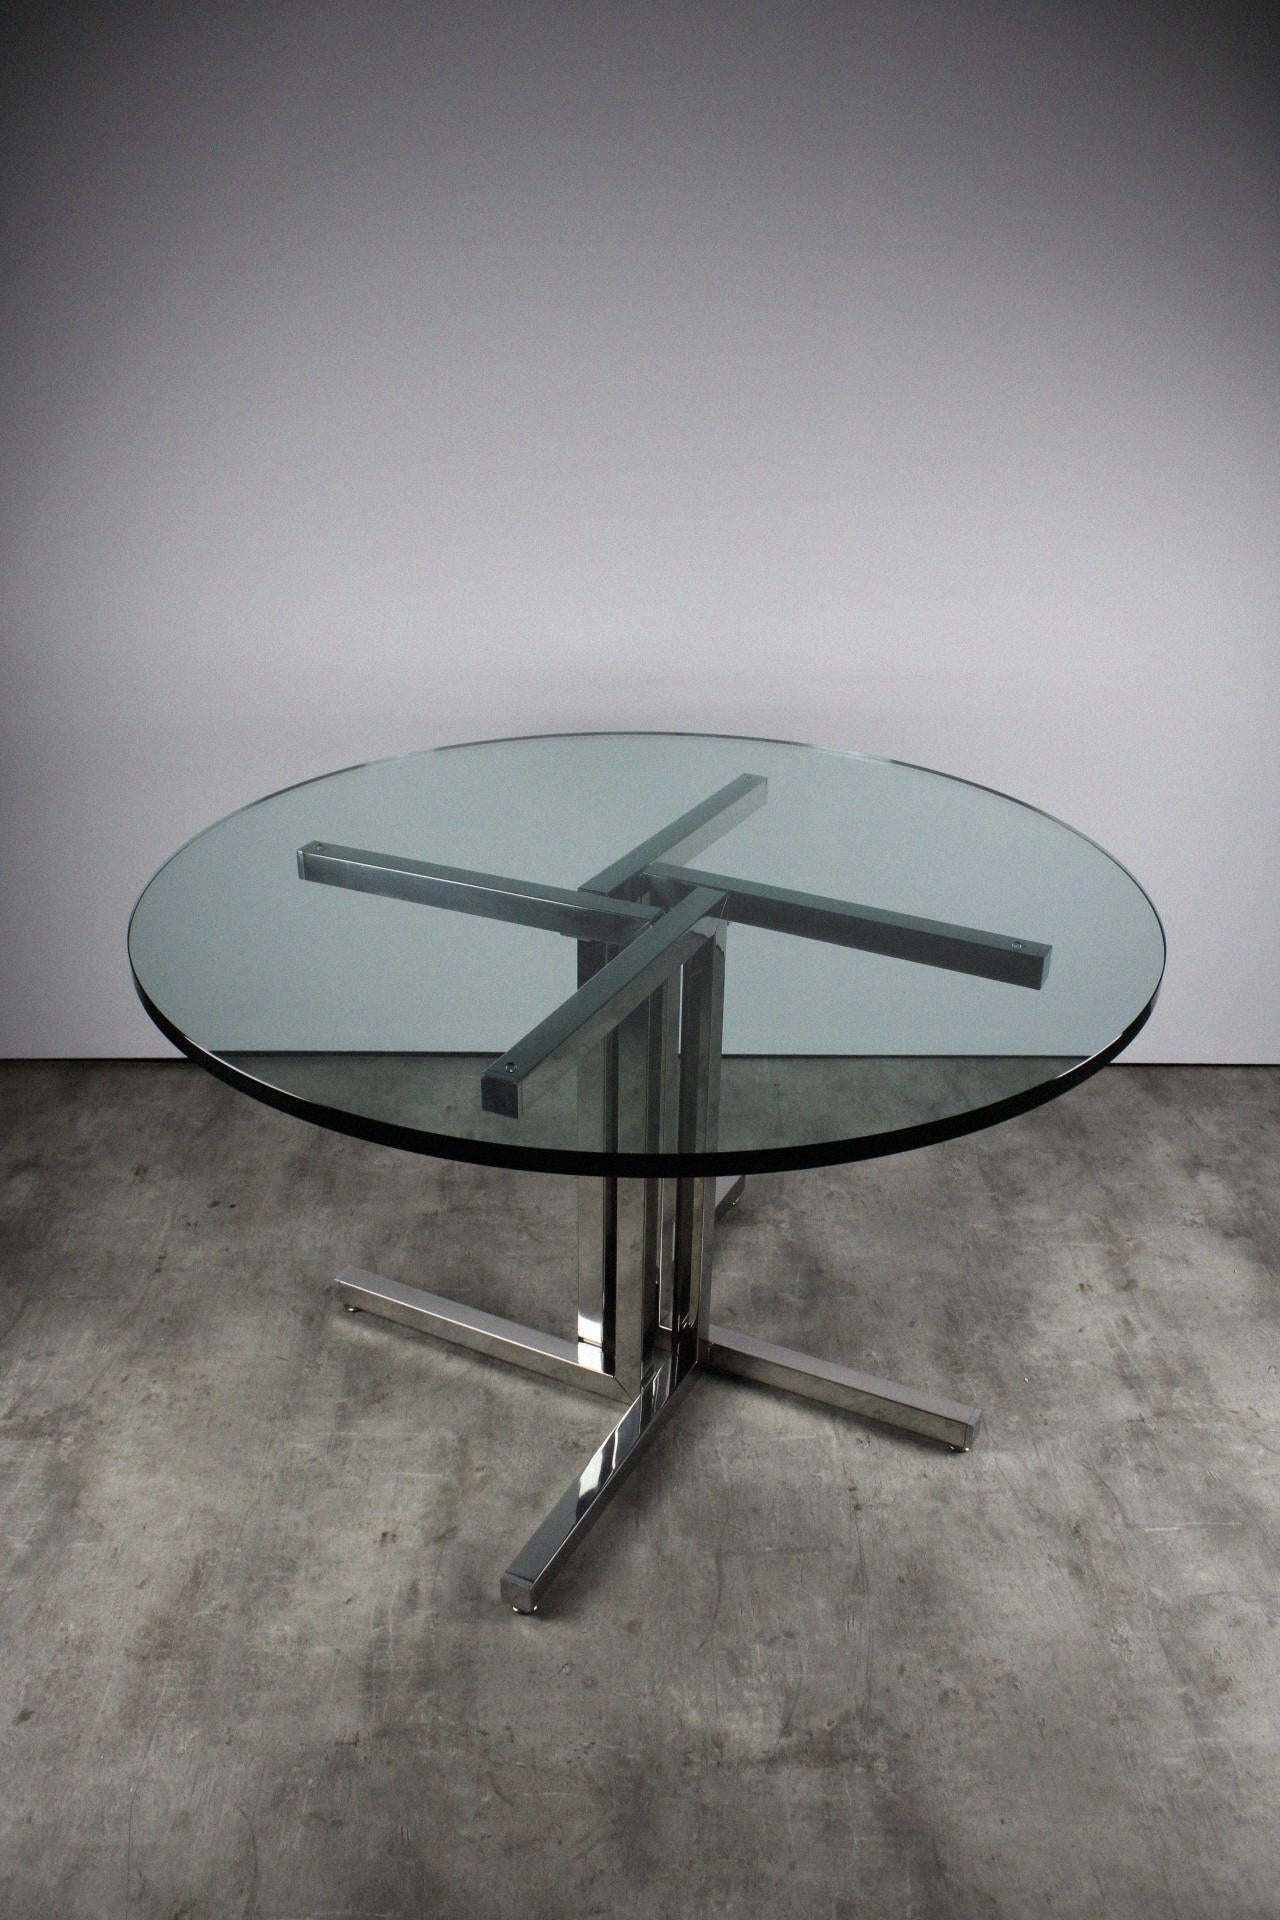 Space Age Peter Ghyczy Dining Table 1970's Vintage Oval Chrome Smoked Glass Hungary For Sale